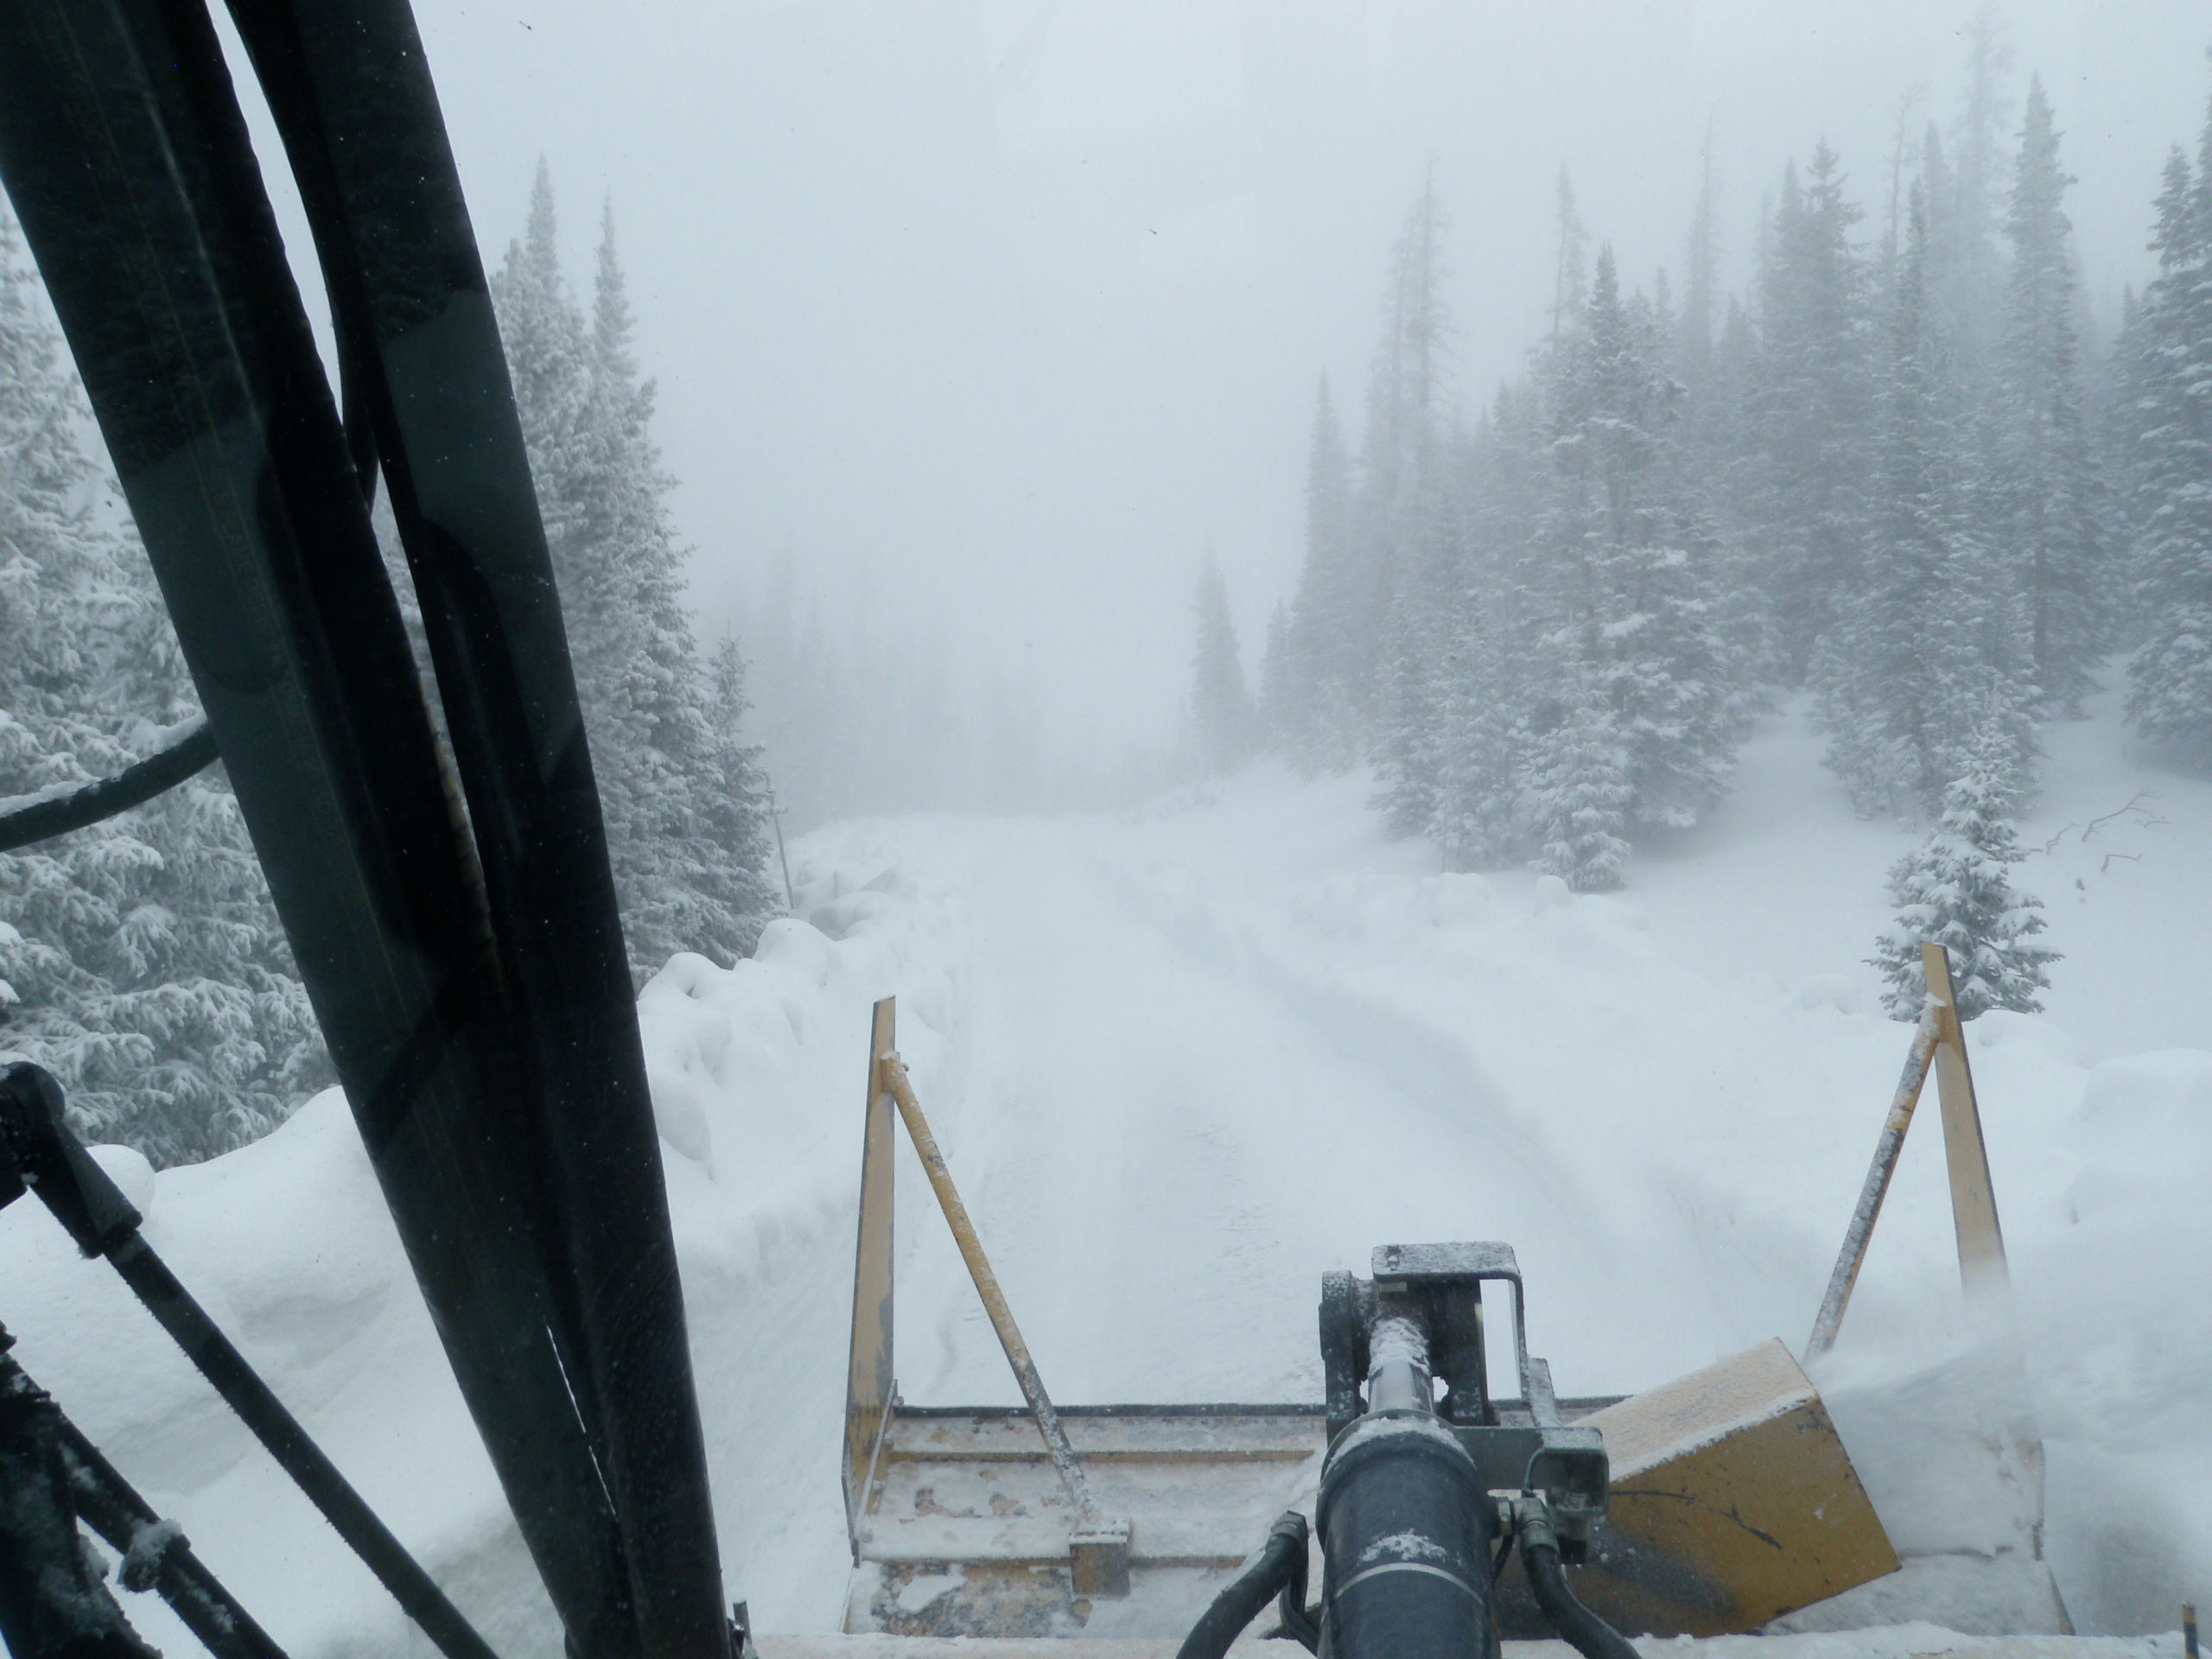 Trail Ridge Road conditions deteriorate on May 20, 2019